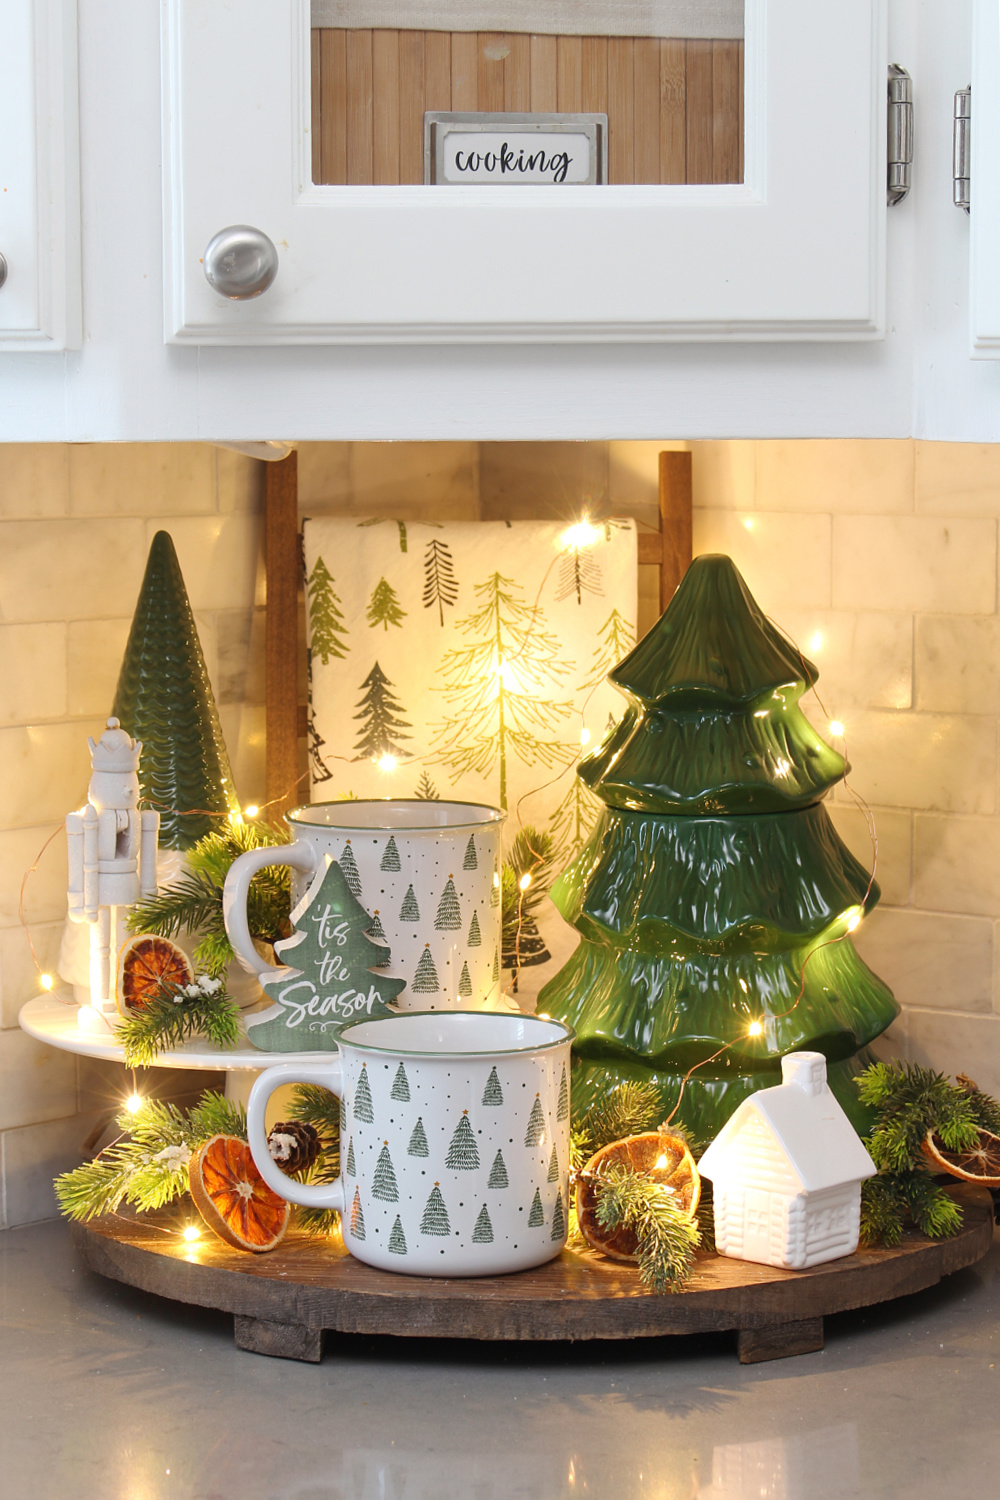 White and green Christmas vignette with trees in a kitchen.